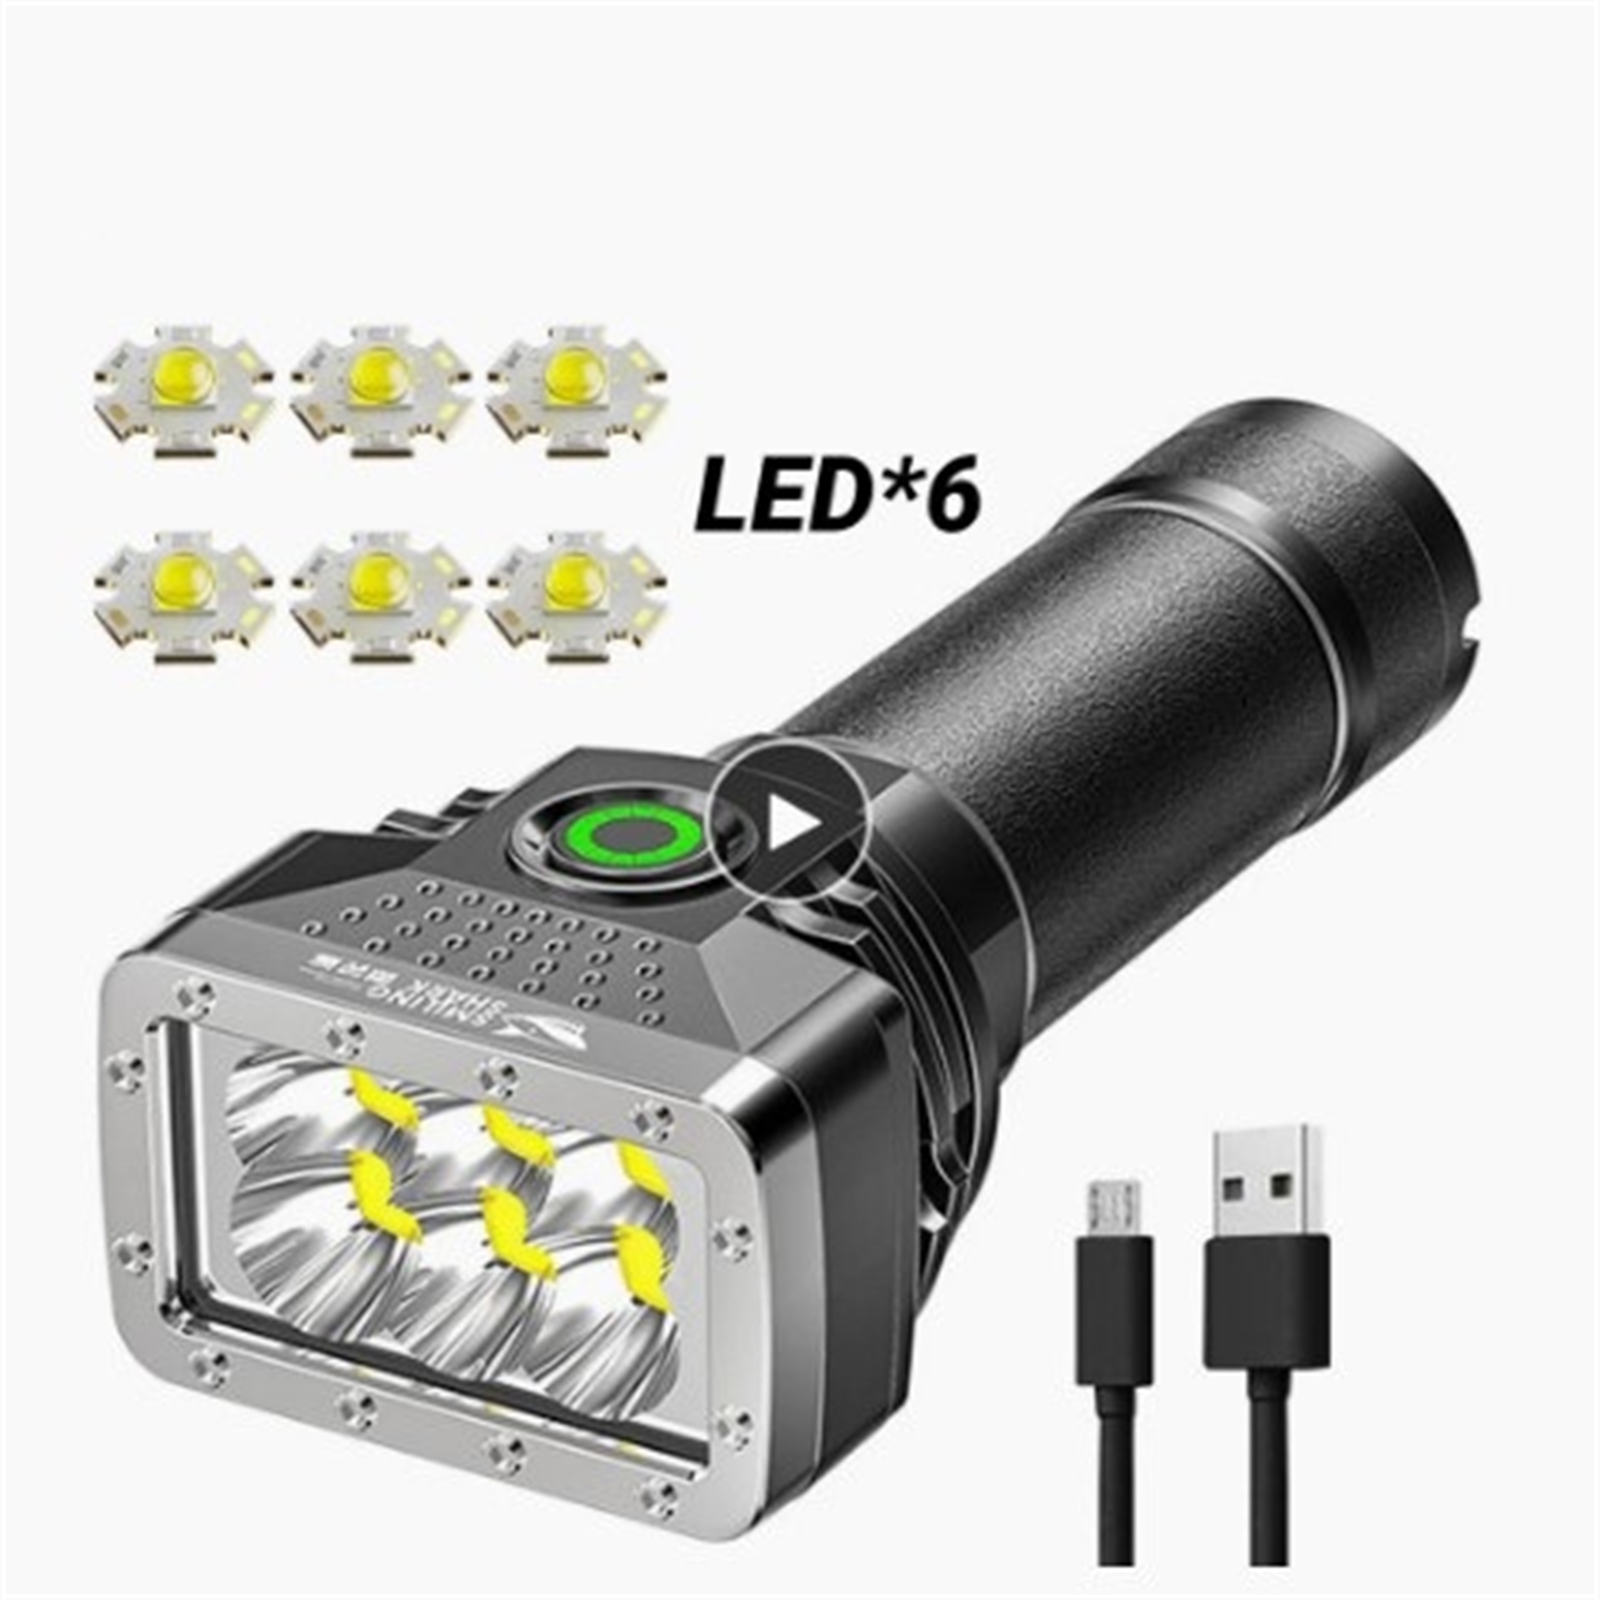 6led Flashlight Usb Rechargeable Power Display Powerful Emergency Light Torch